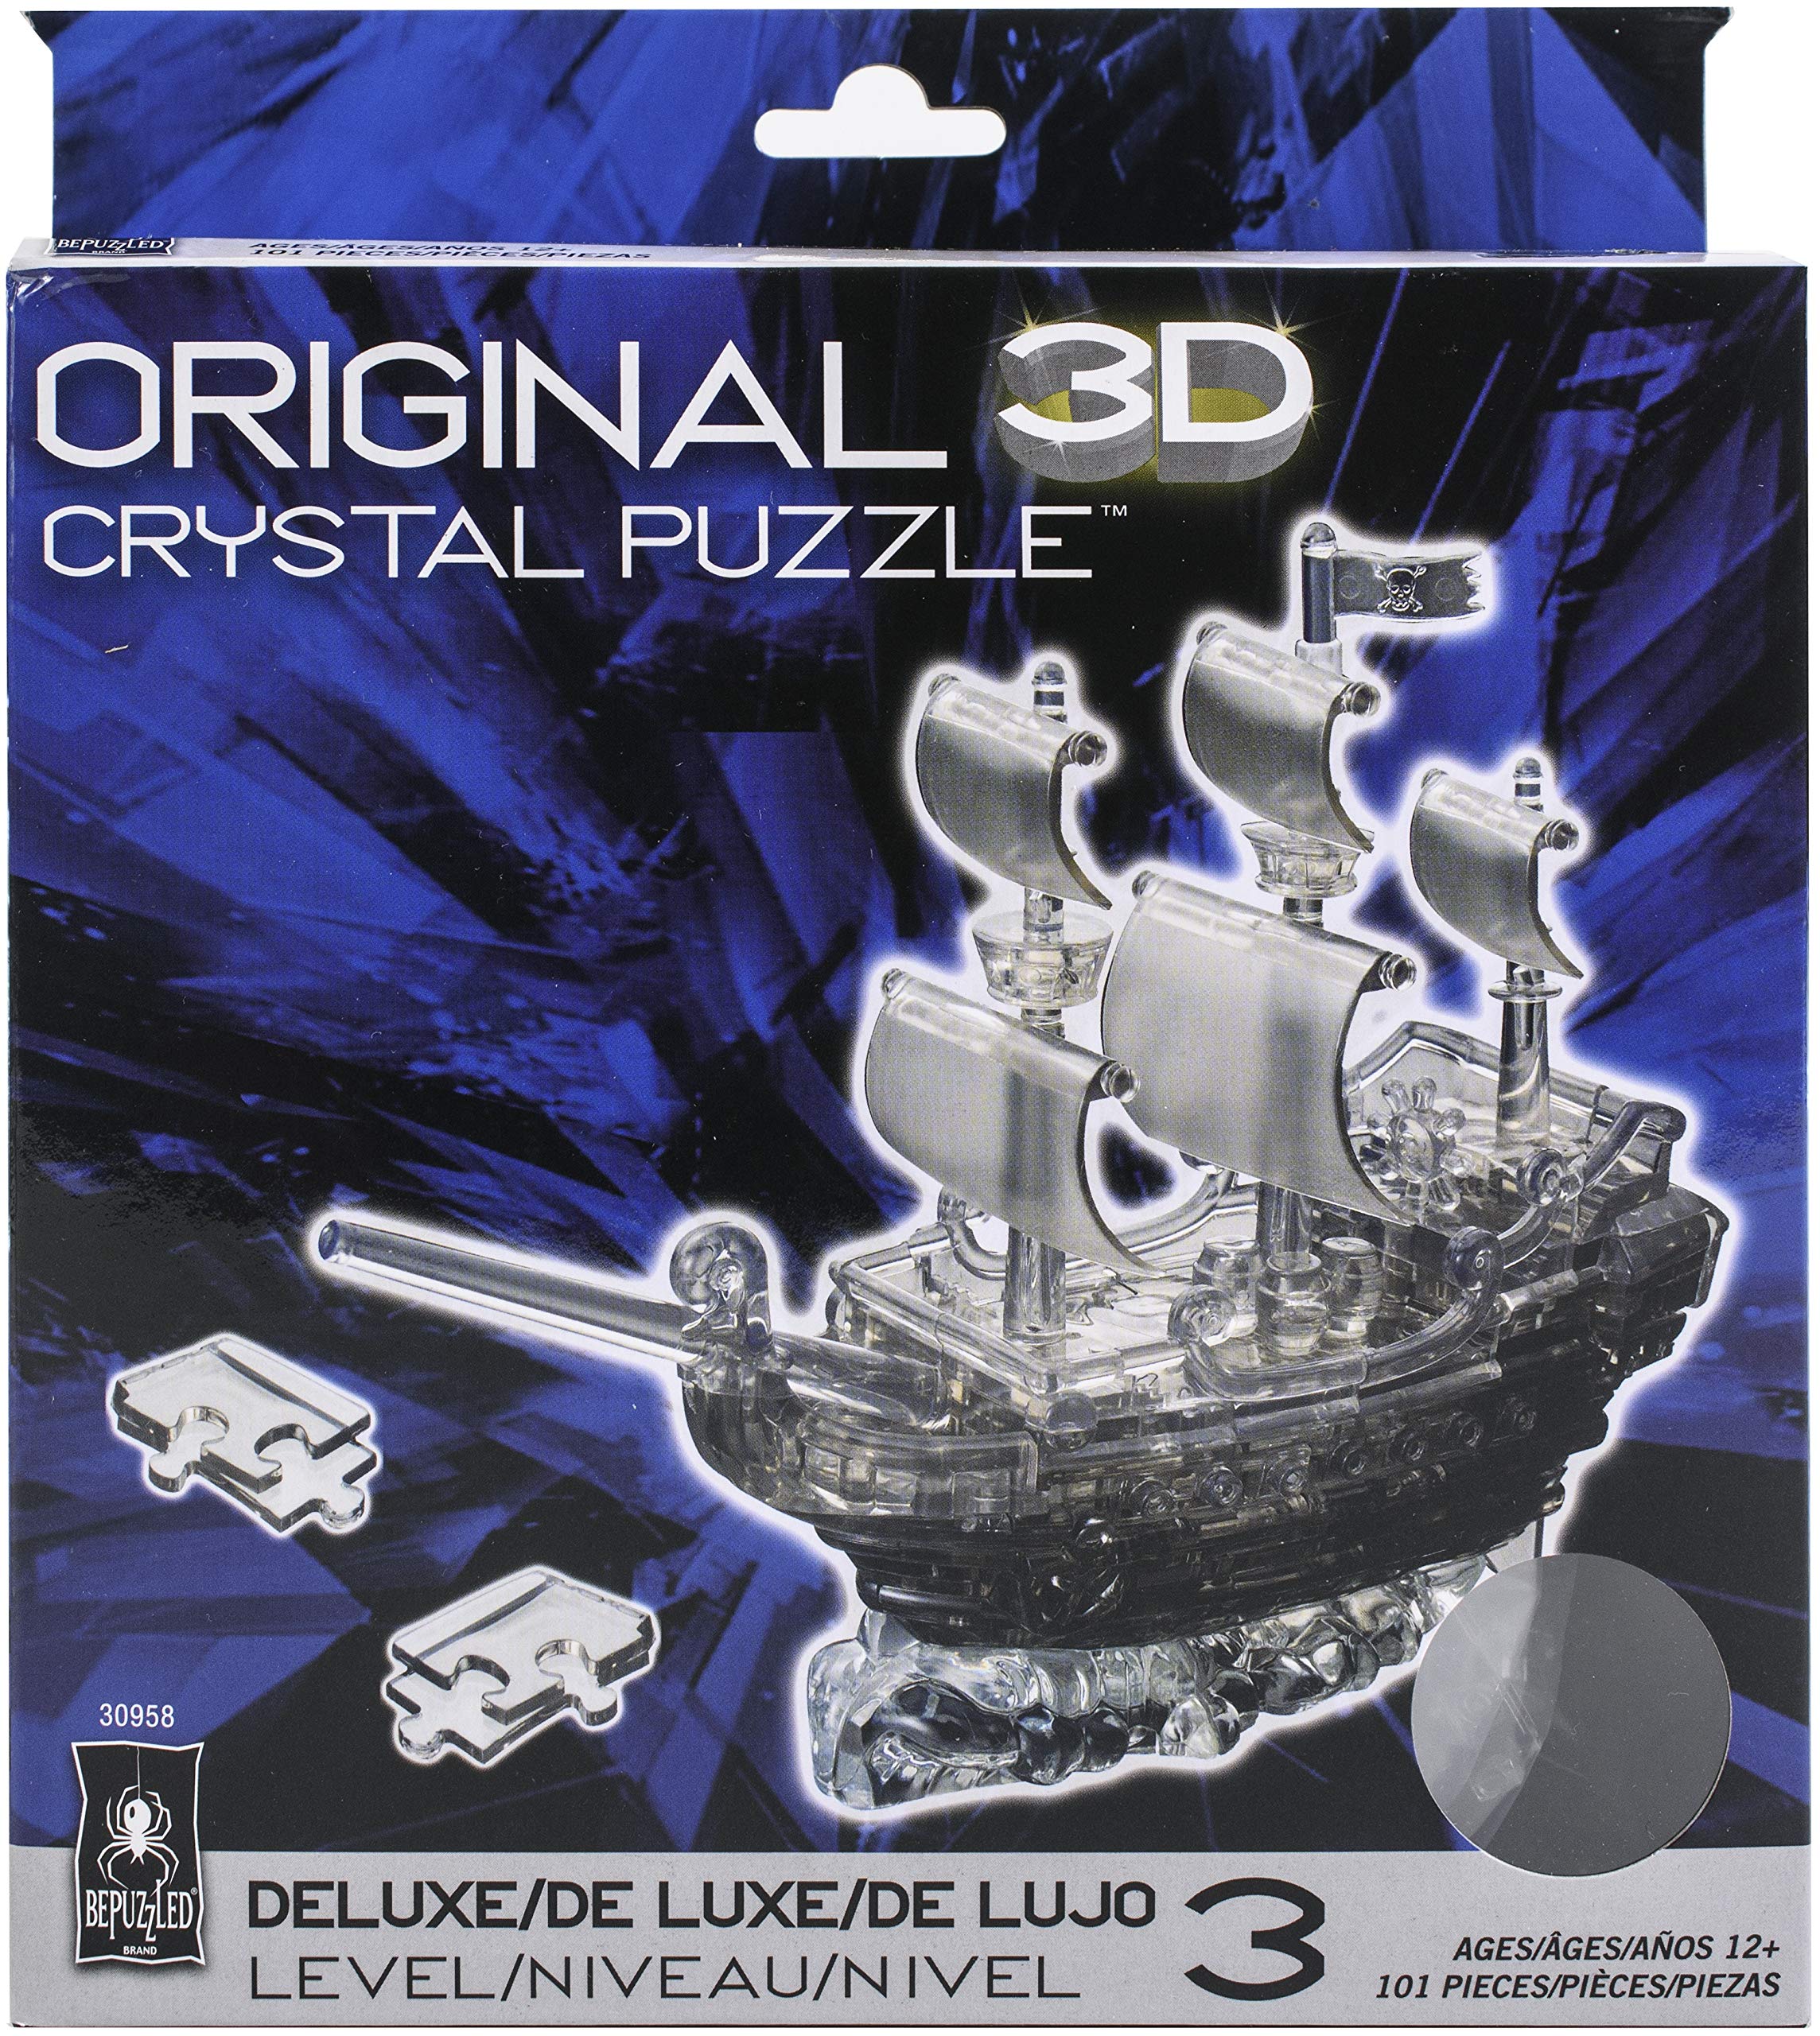 Bepuzzled Original 3D Crystal Puzzle Deluxe - Pirate Ship, Black - Fun yet challenging brain teaser that will test your skills and imagination, For Ages 12+